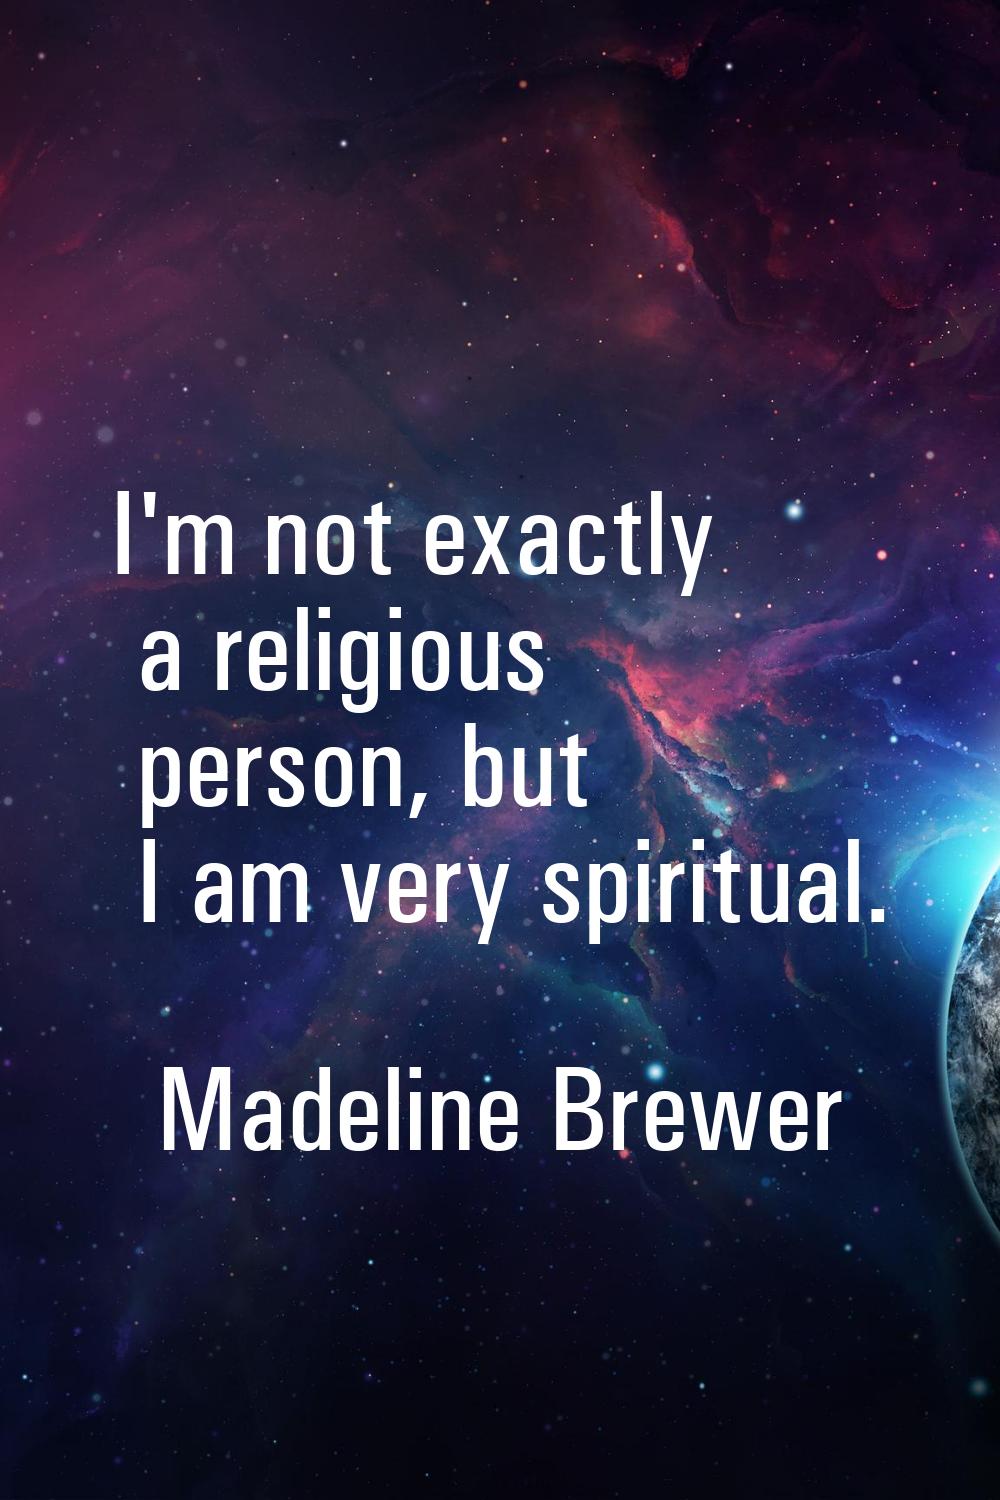 I'm not exactly a religious person, but I am very spiritual.